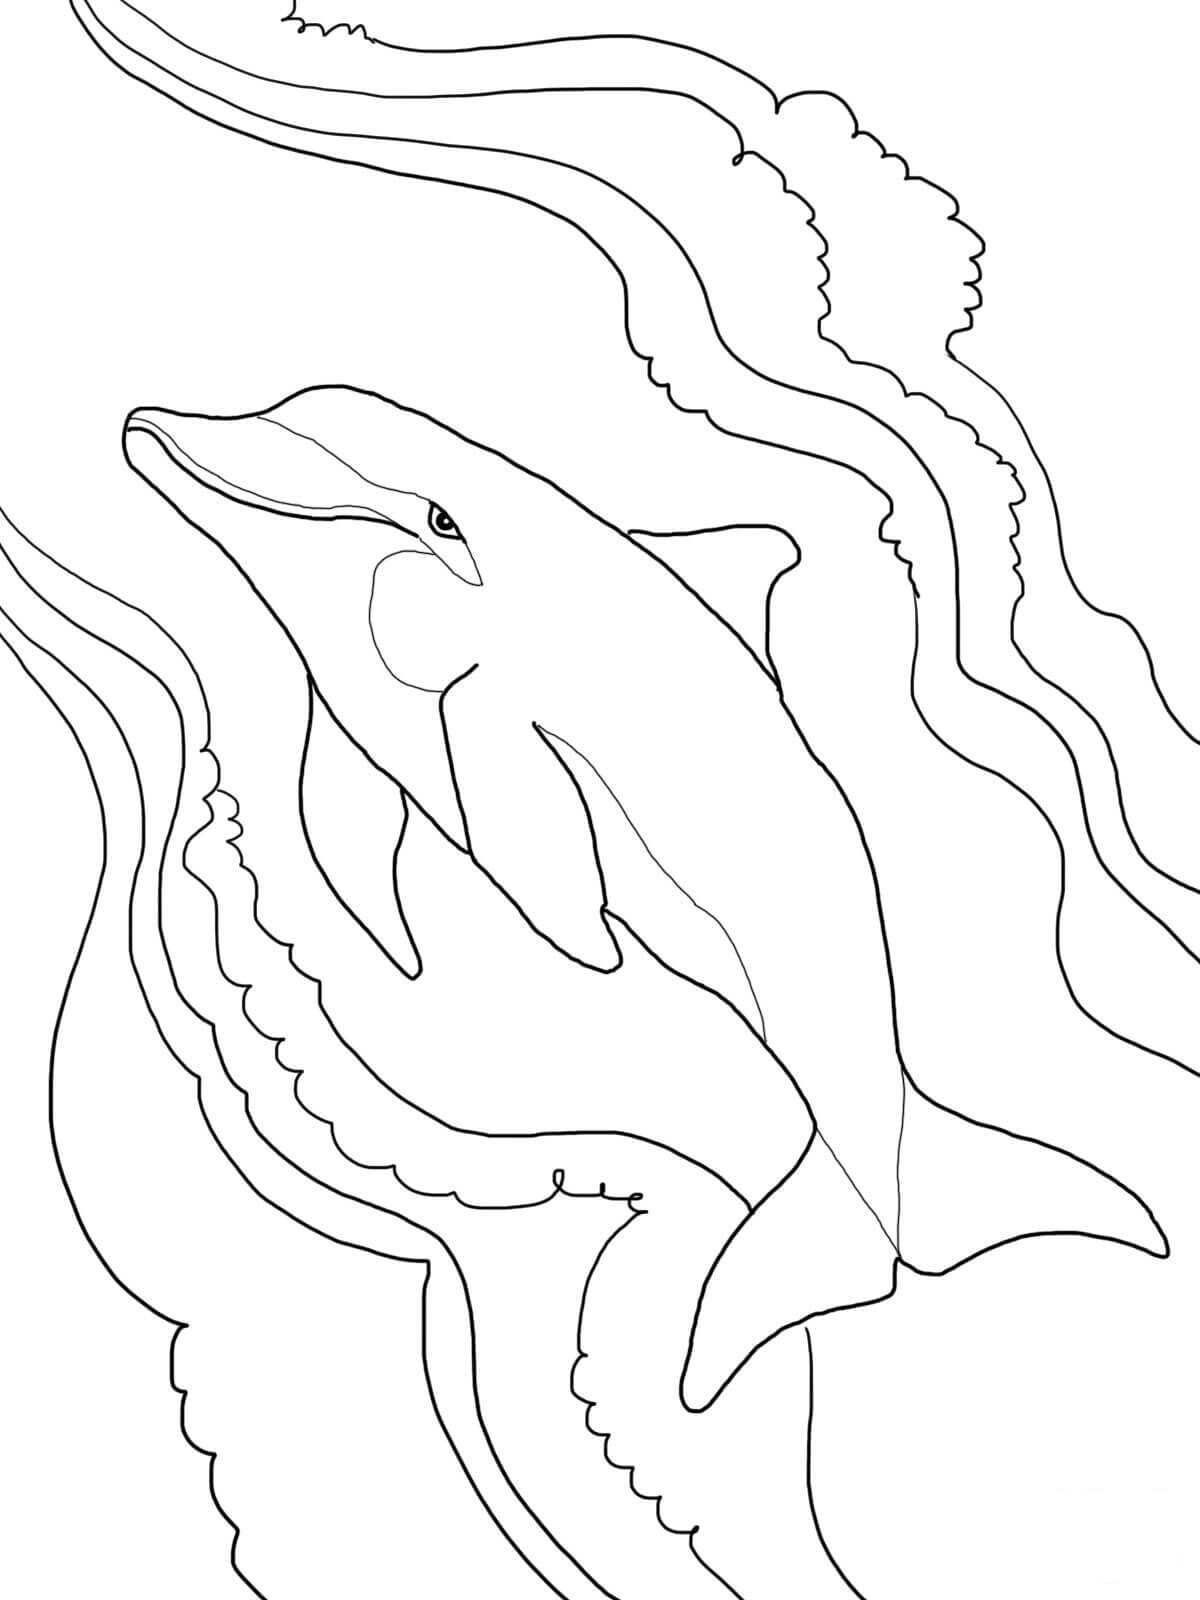 Dolphin Swims Along The Water Coloring Pages